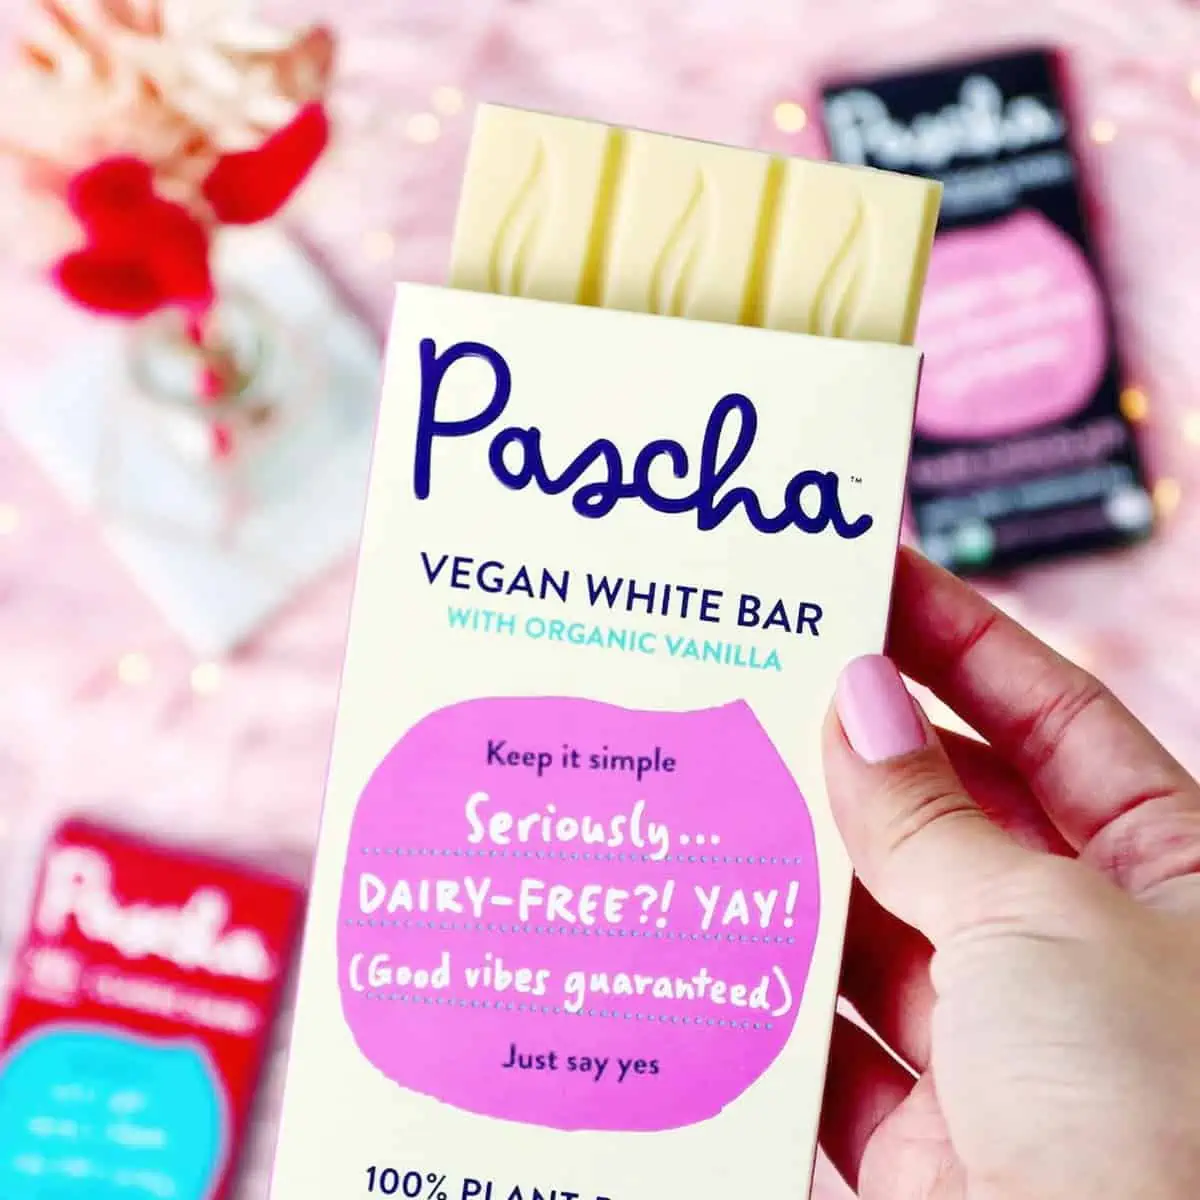 A hand holding a bar of Pascha's vegan white chocolate.